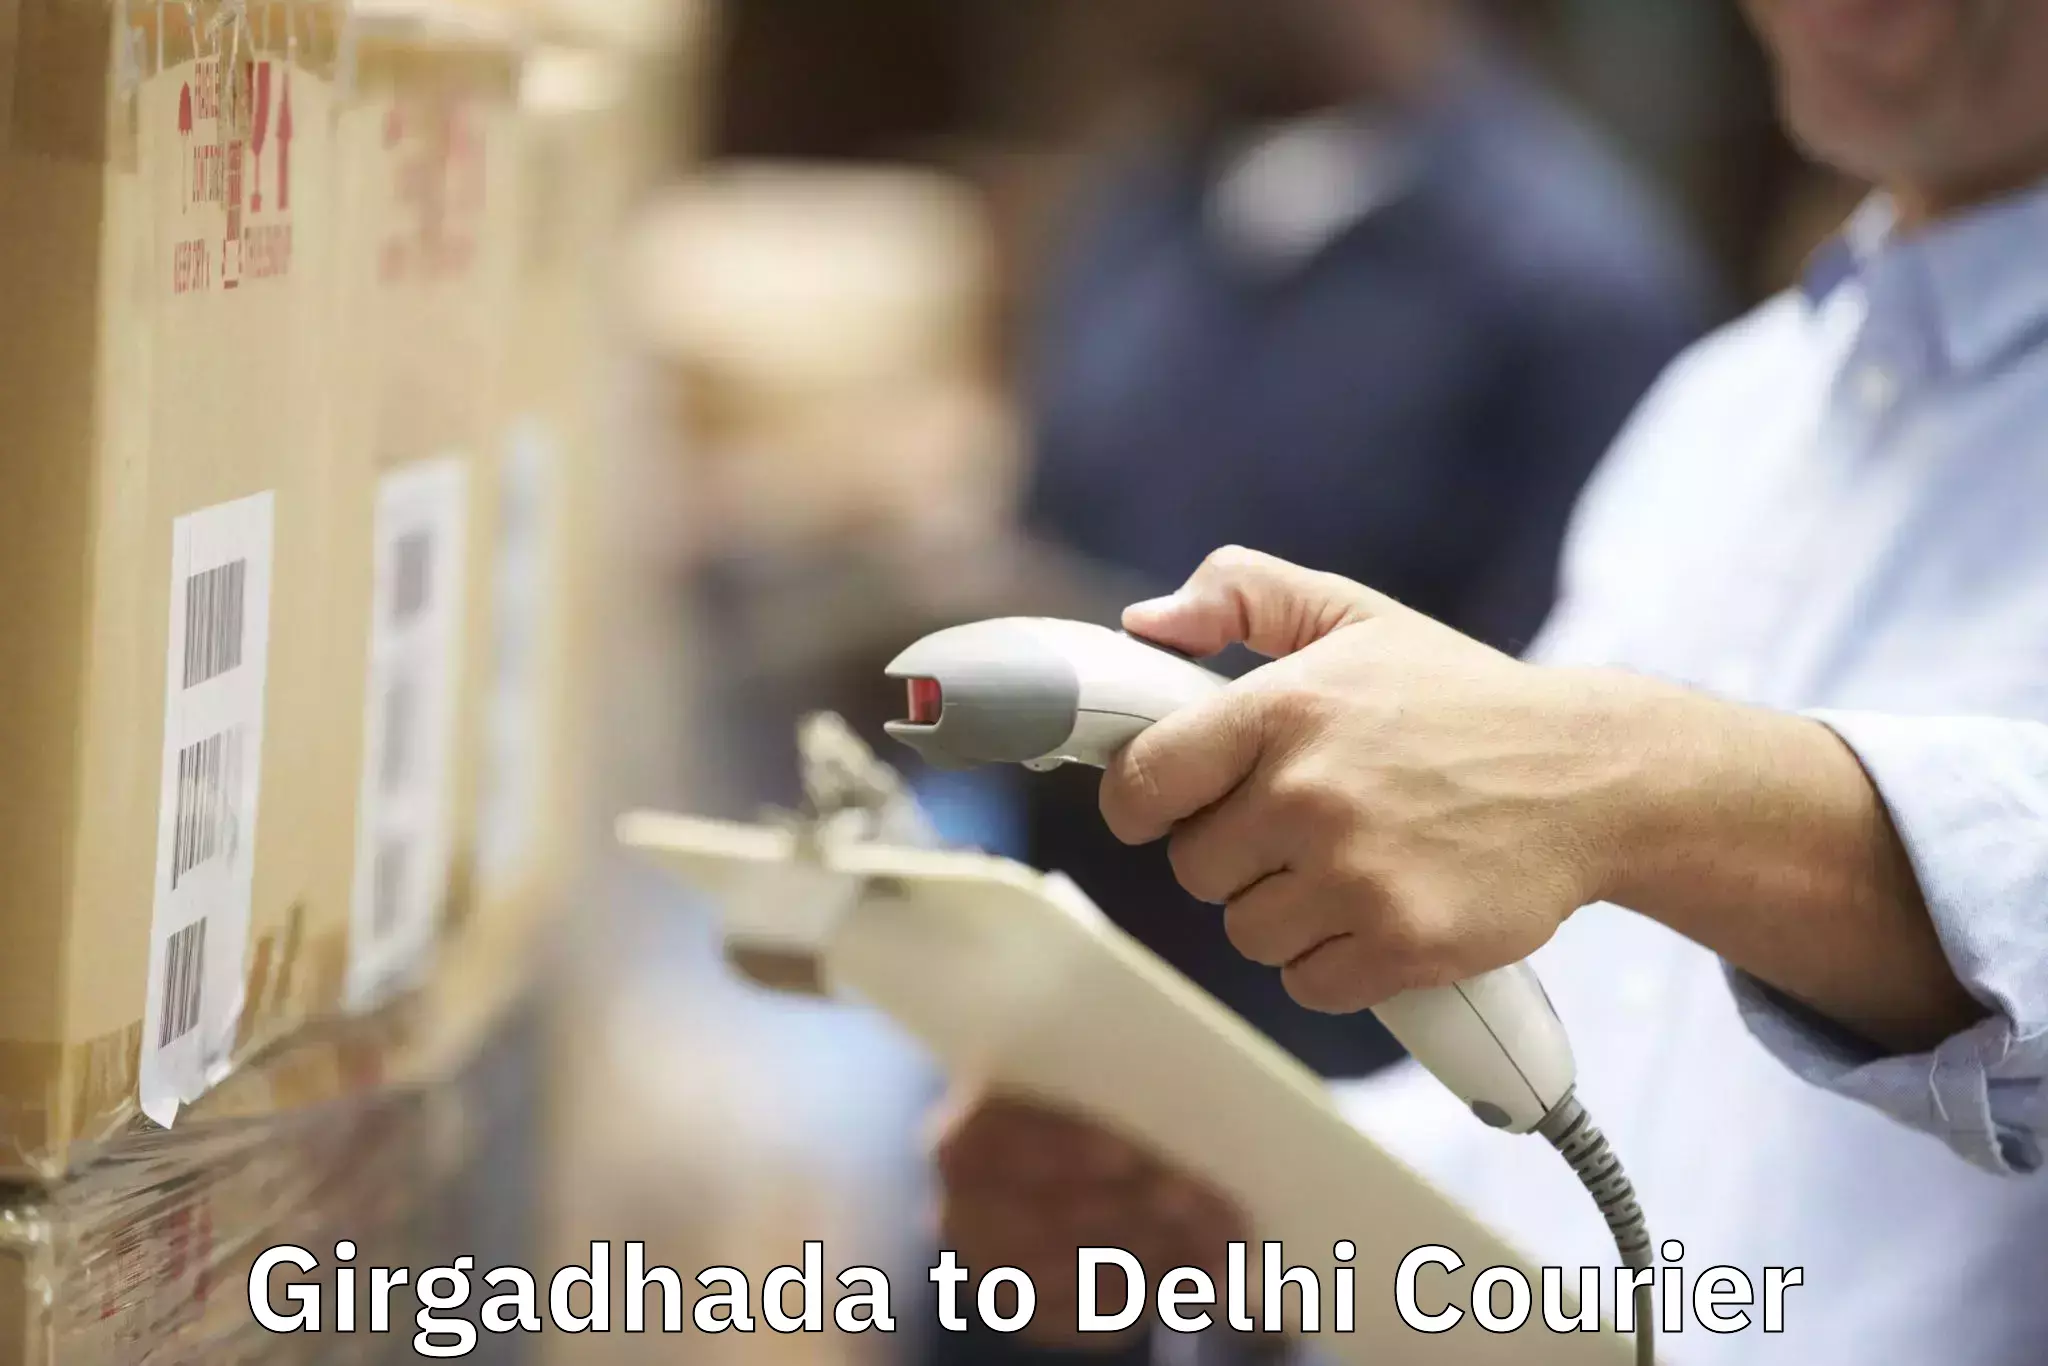 Budget-friendly moving services in Girgadhada to Delhi